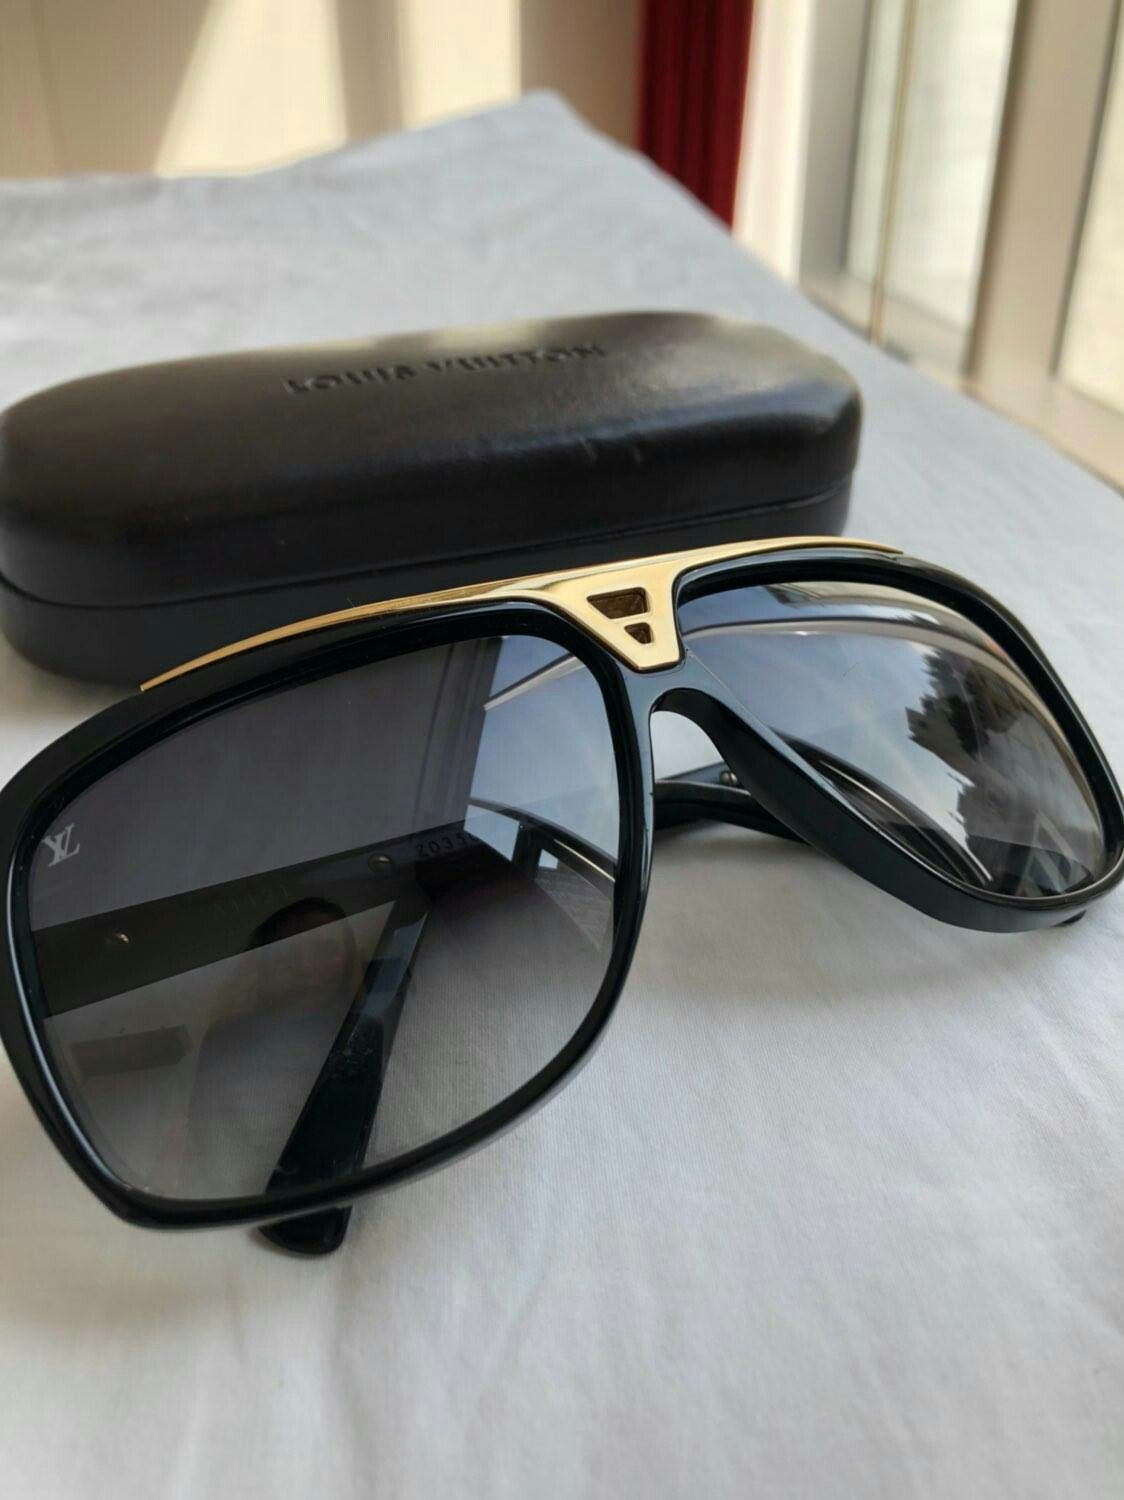 Louis Vuitton Evidence Sunglasses for Sale in Lindenwold, NJ - OfferUp